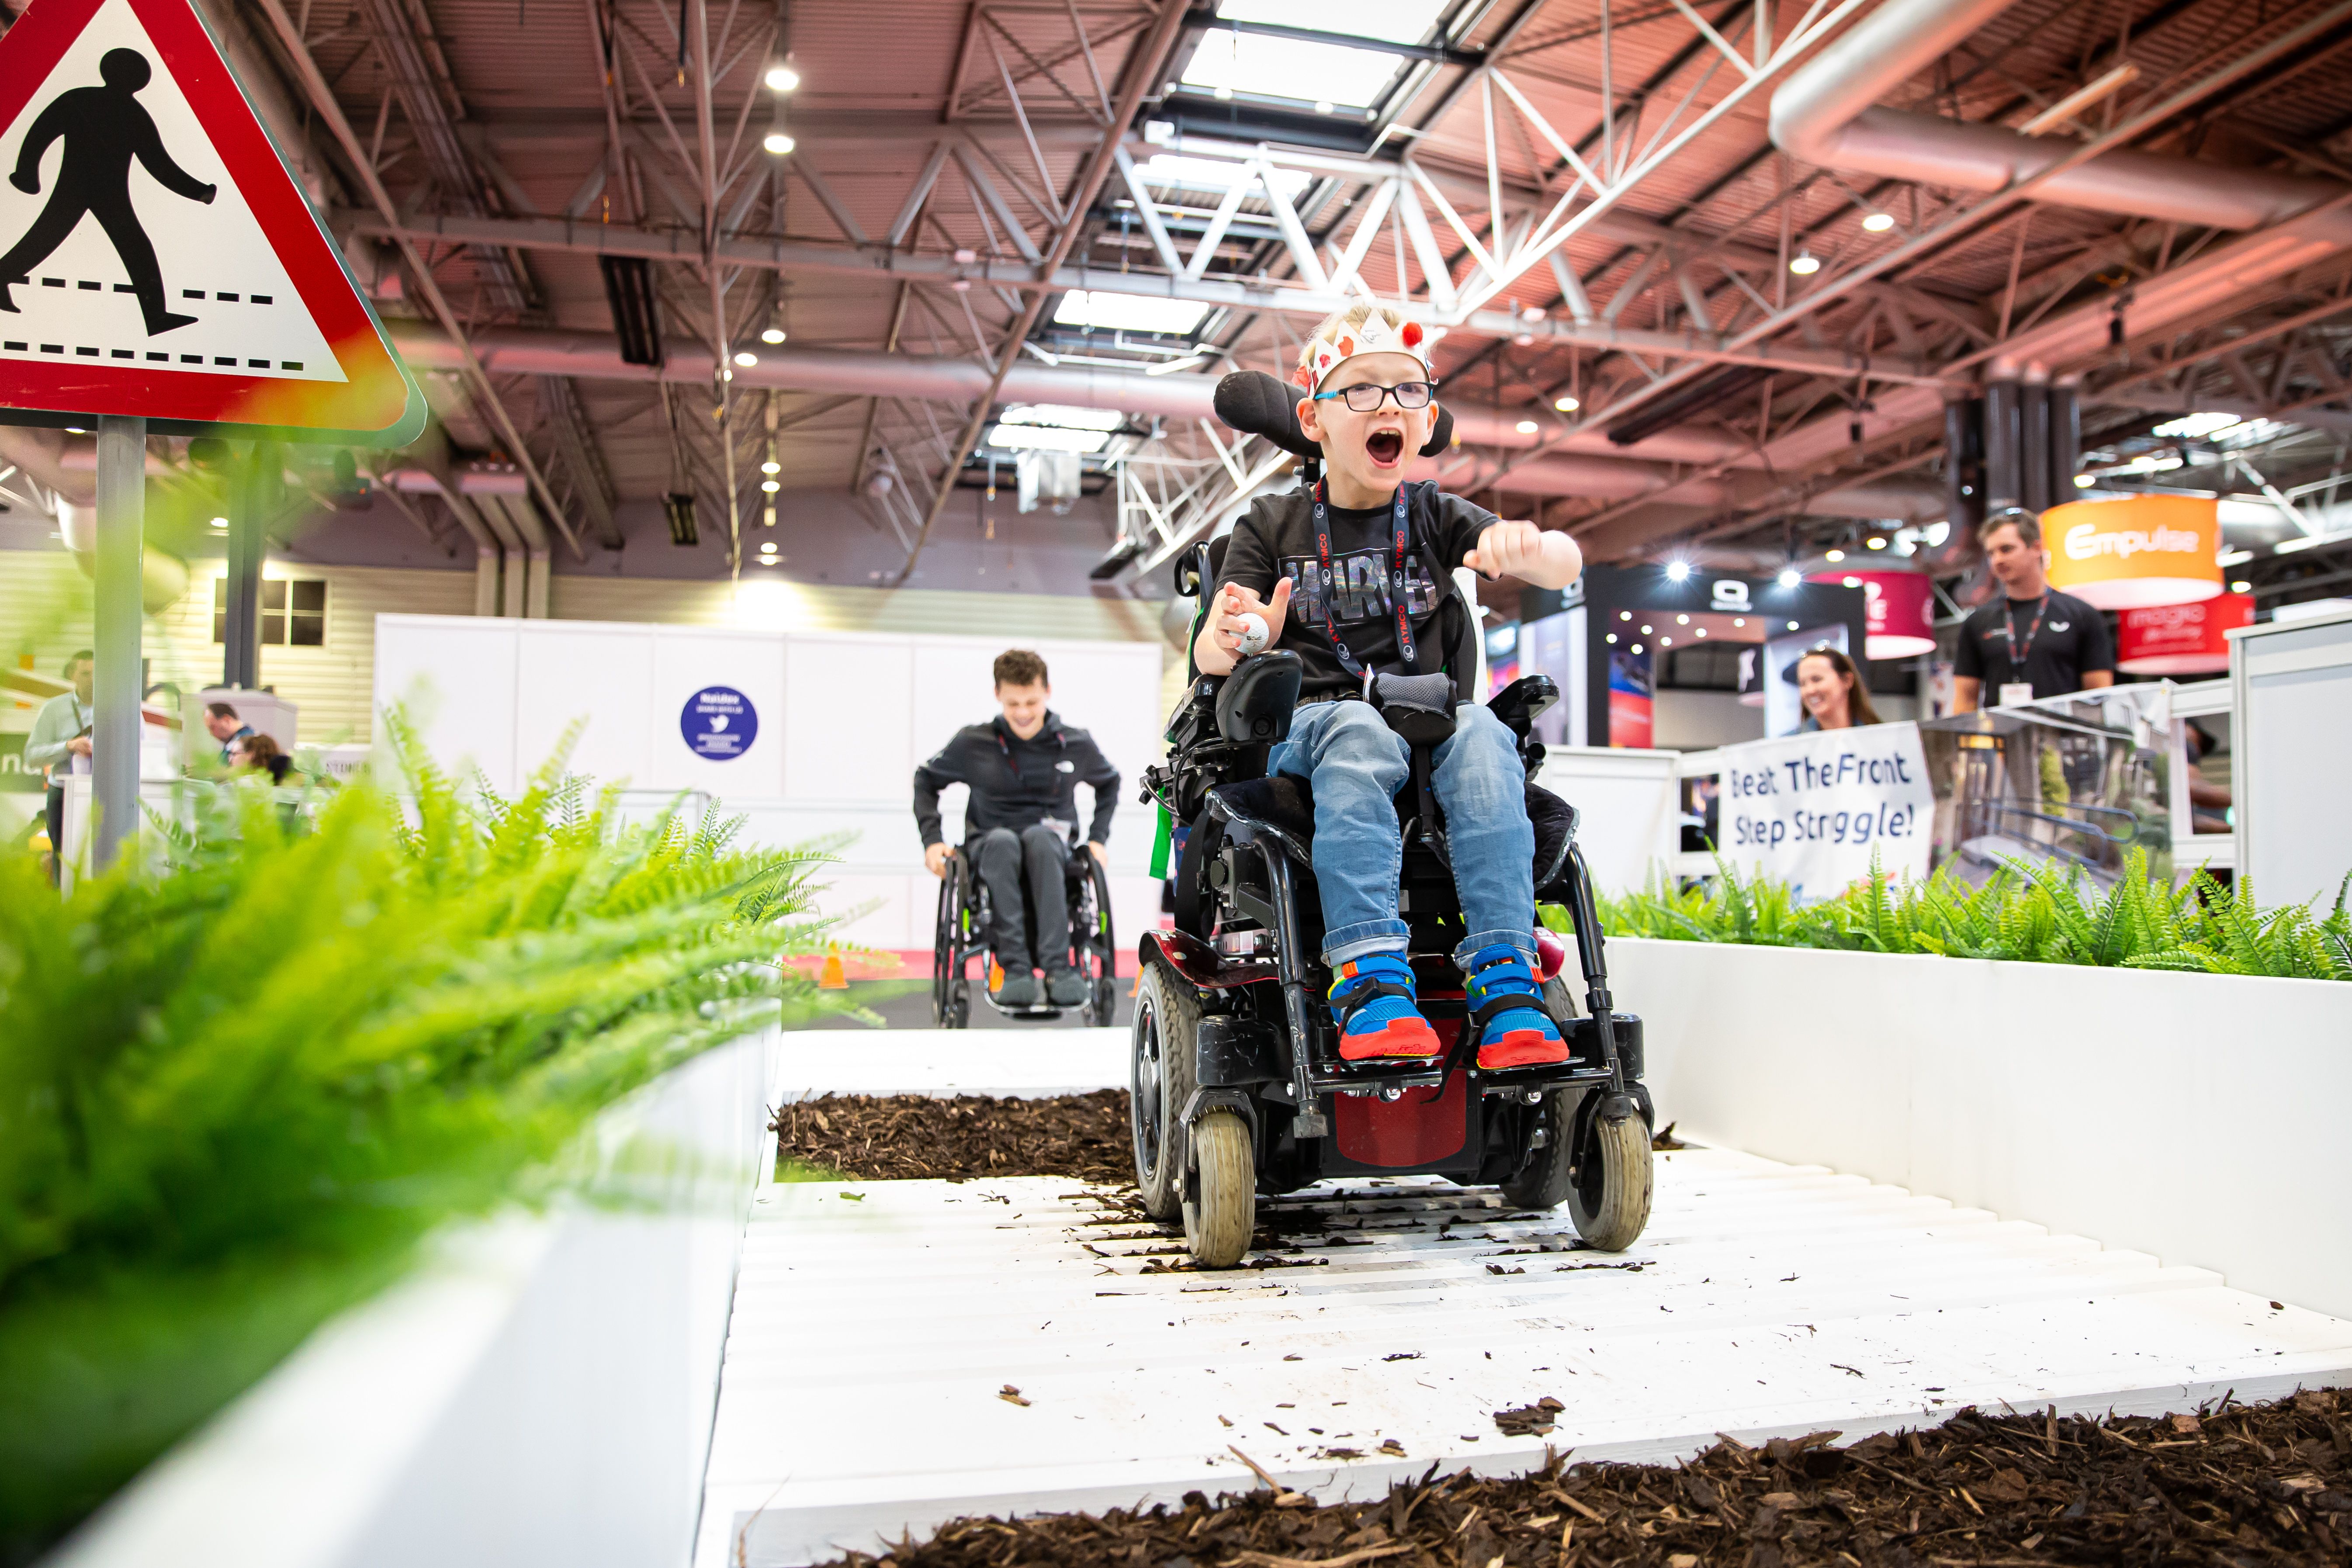 Naidex visitor testing out the track in his wheelchair